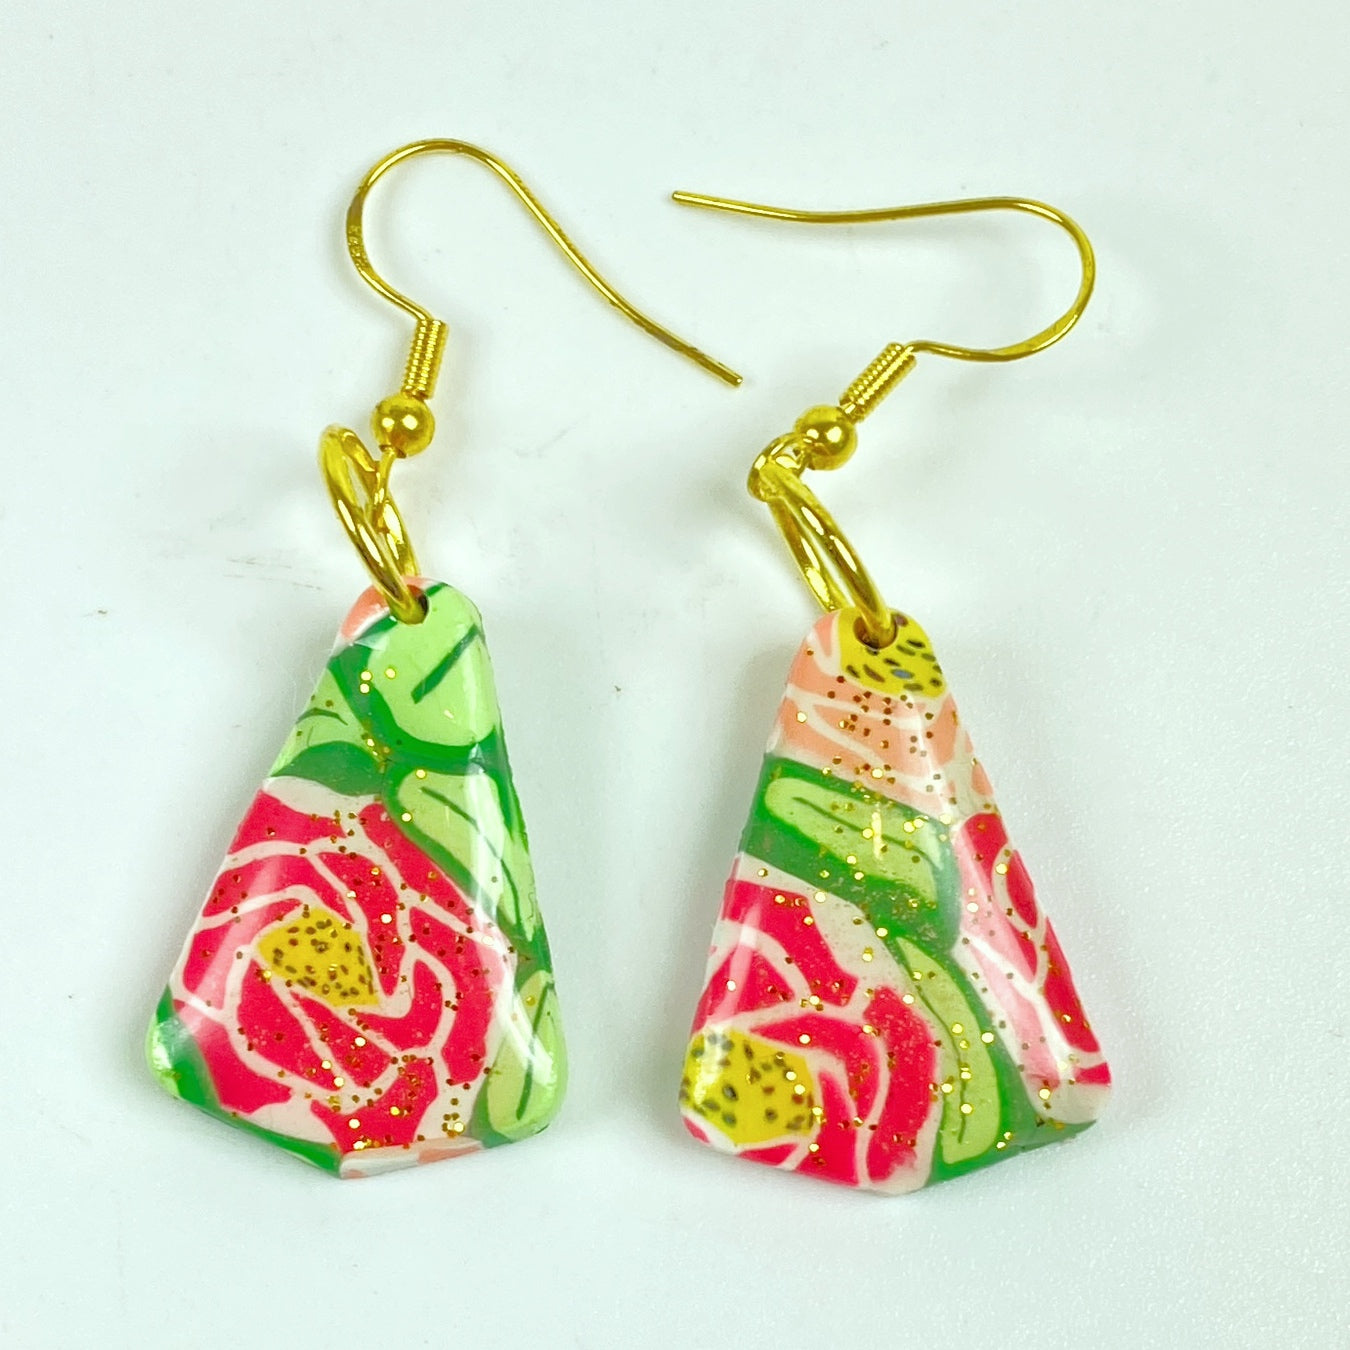 Whispering Roses Handmade Polymer Clay Dangle Earrings on a plain background